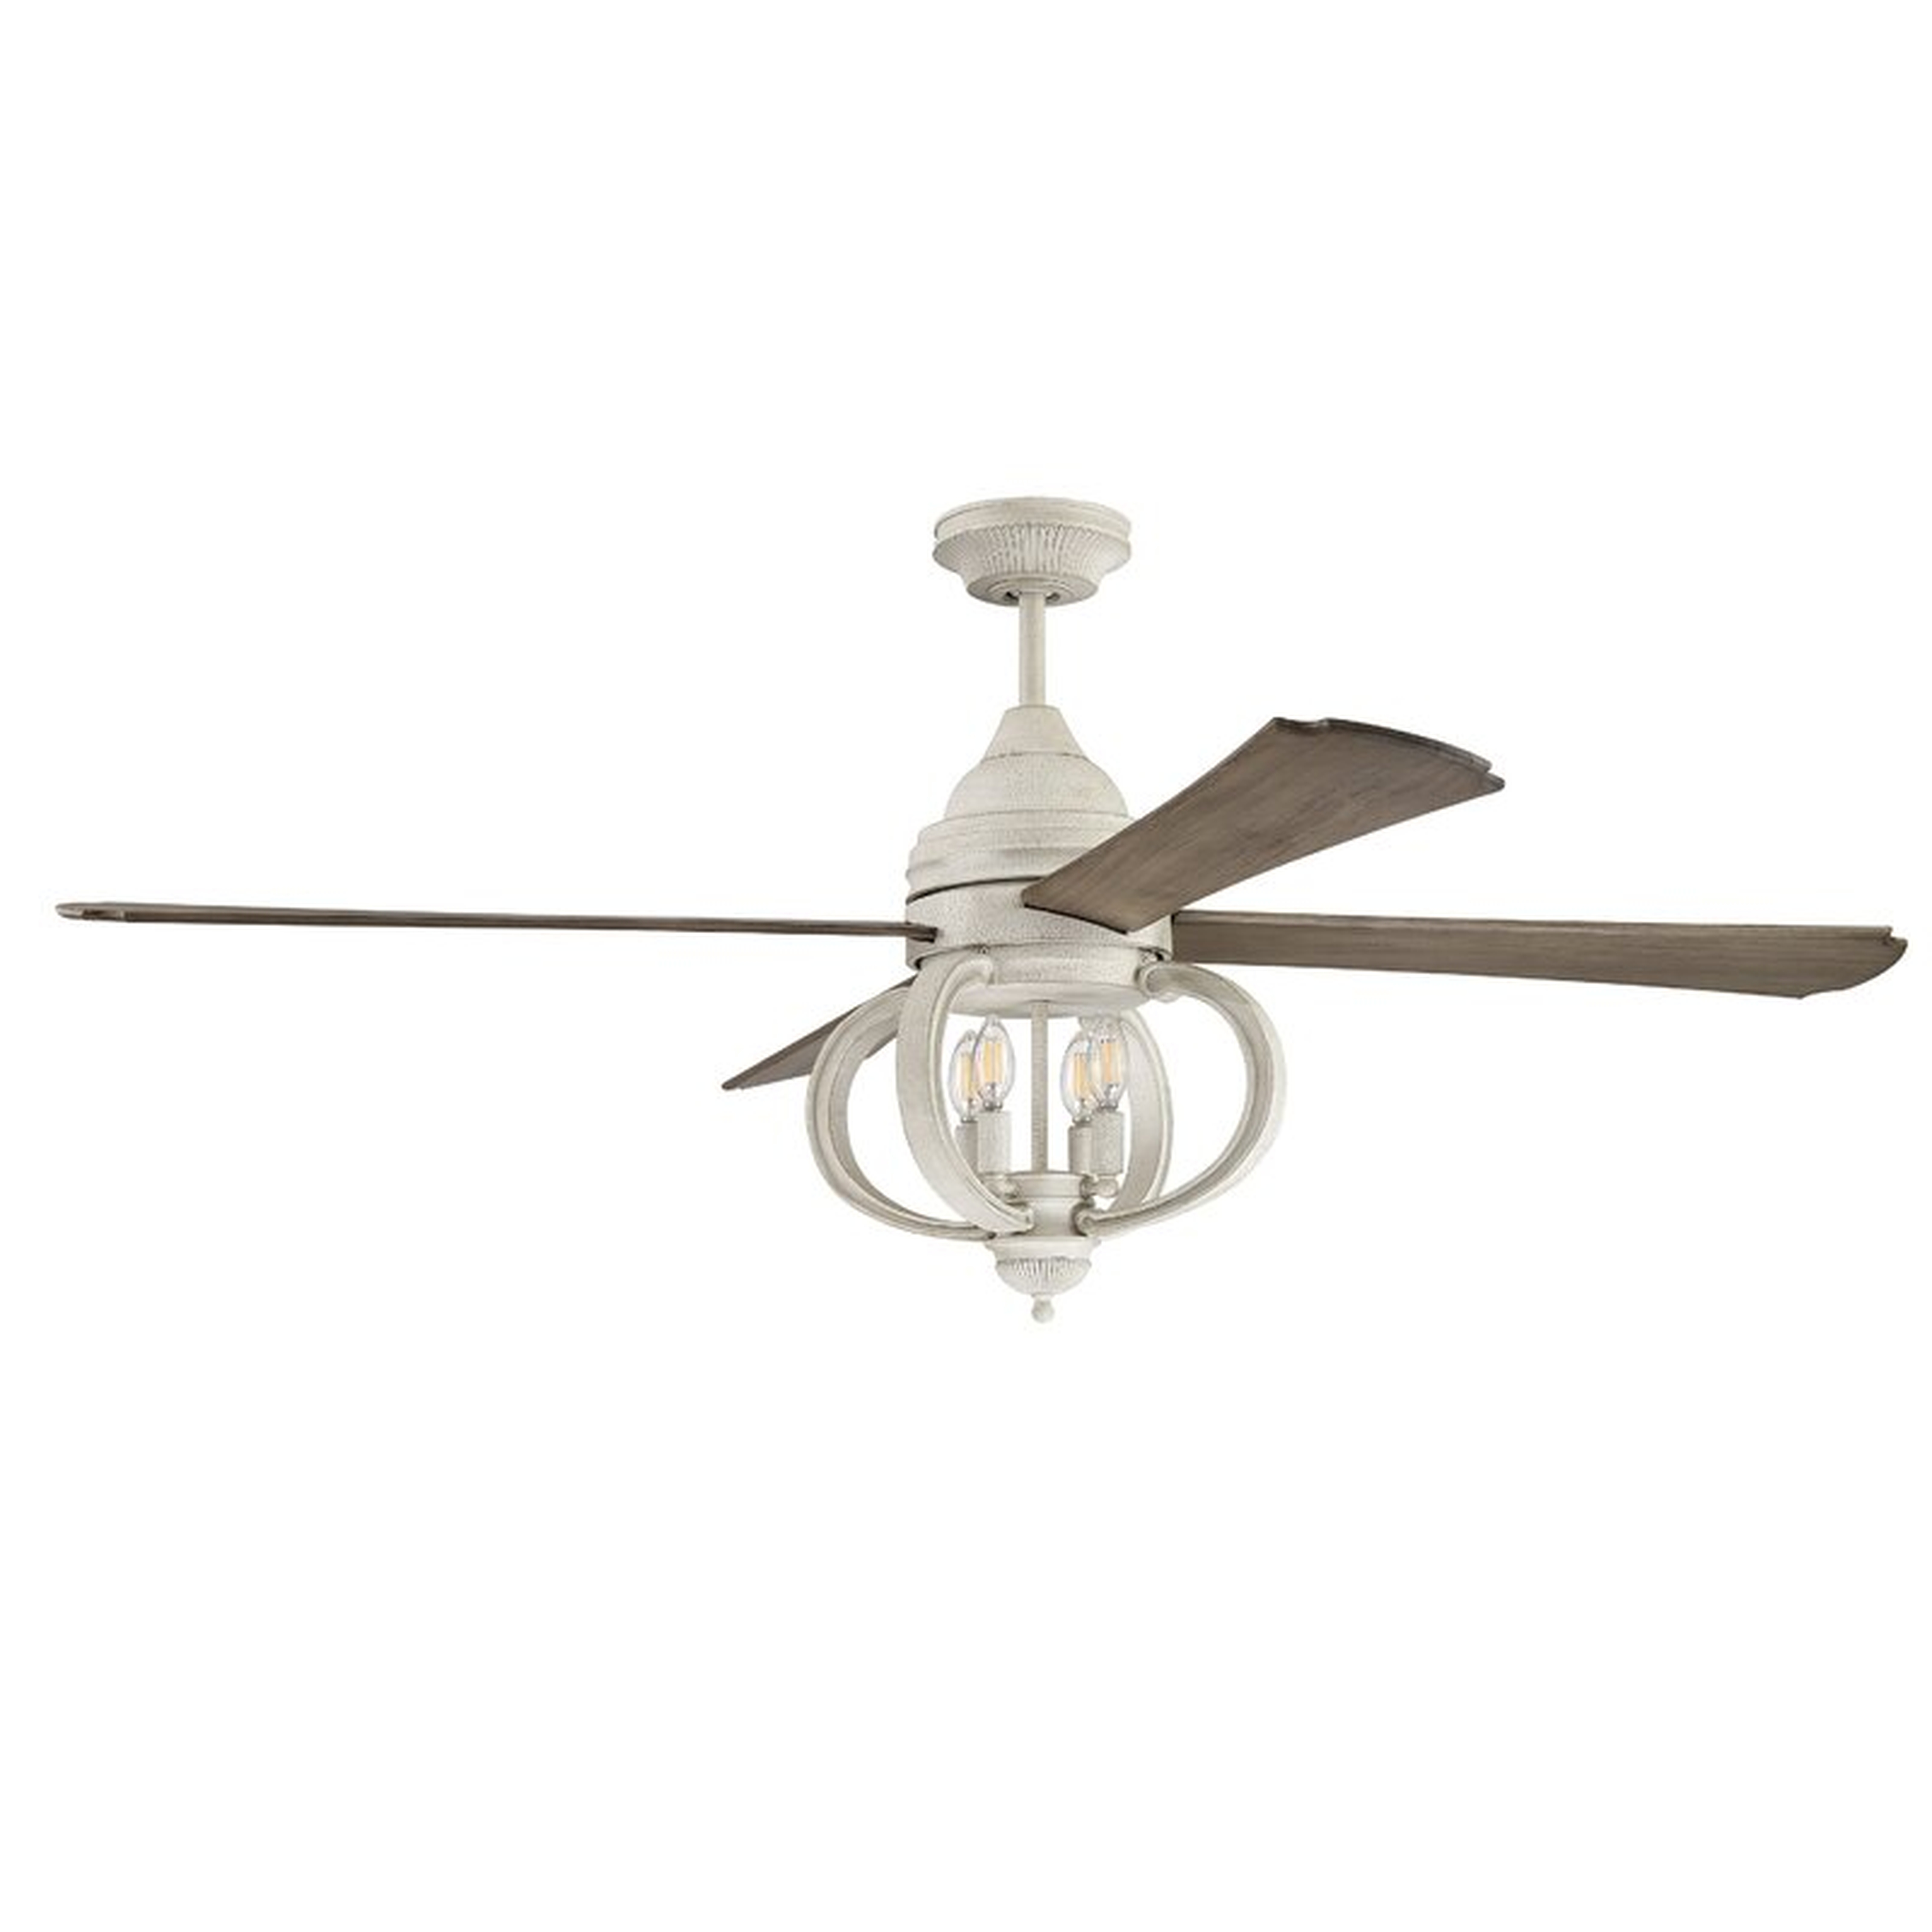 60'' Nevitt 4 - Blade Standard Ceiling Fan with Remote Control and Light Kit Included - Wayfair